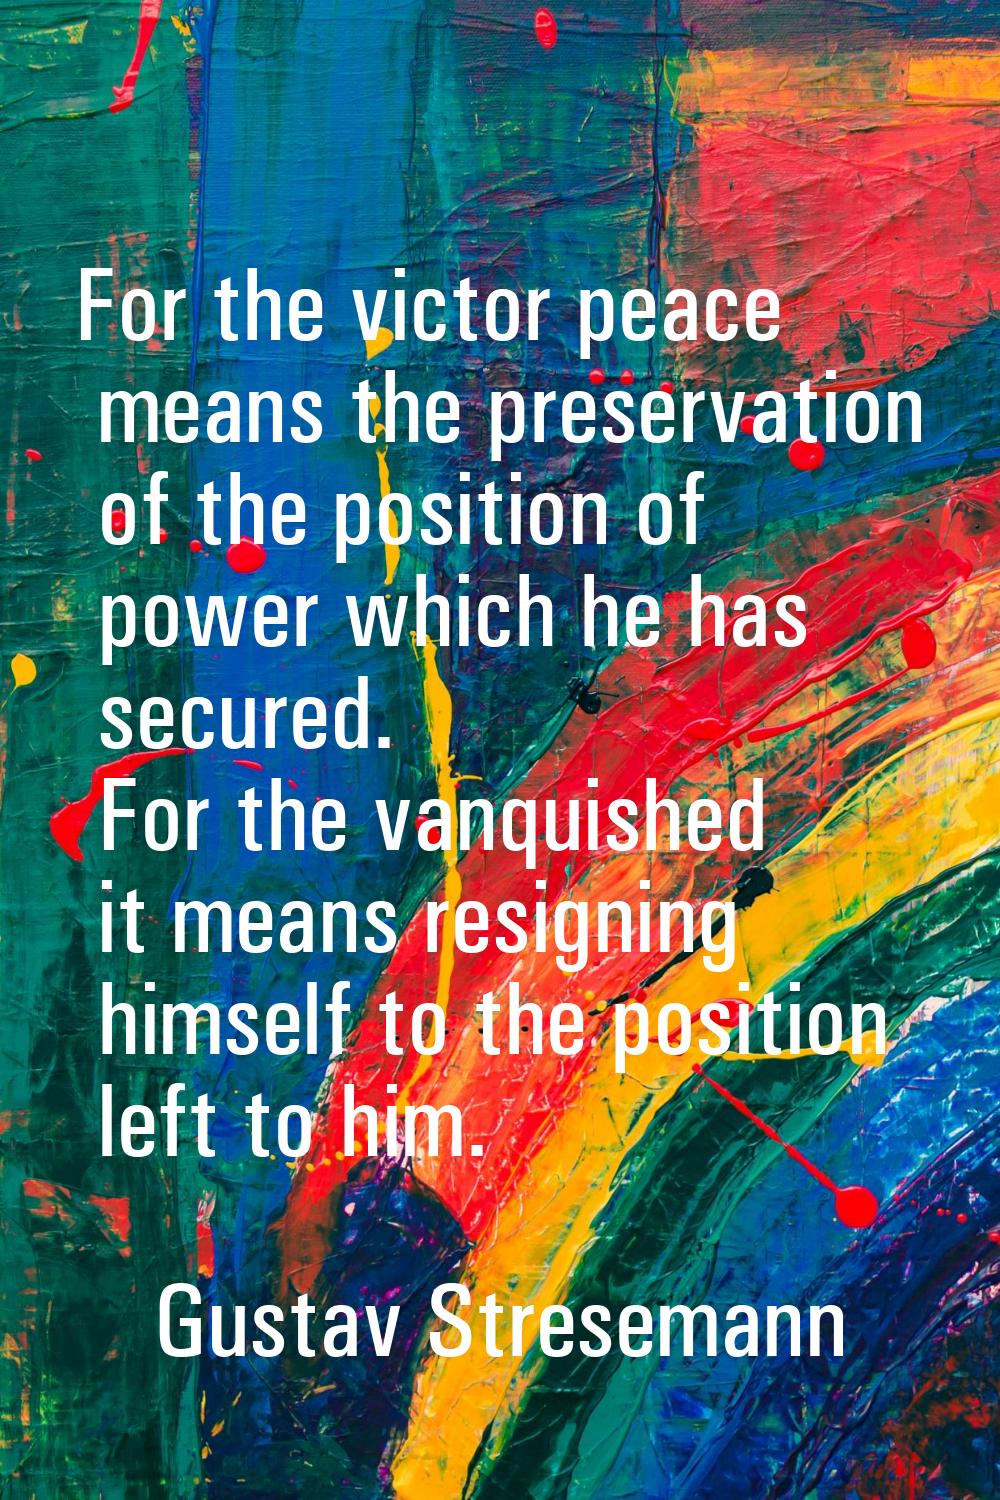 For the victor peace means the preservation of the position of power which he has secured. For the 